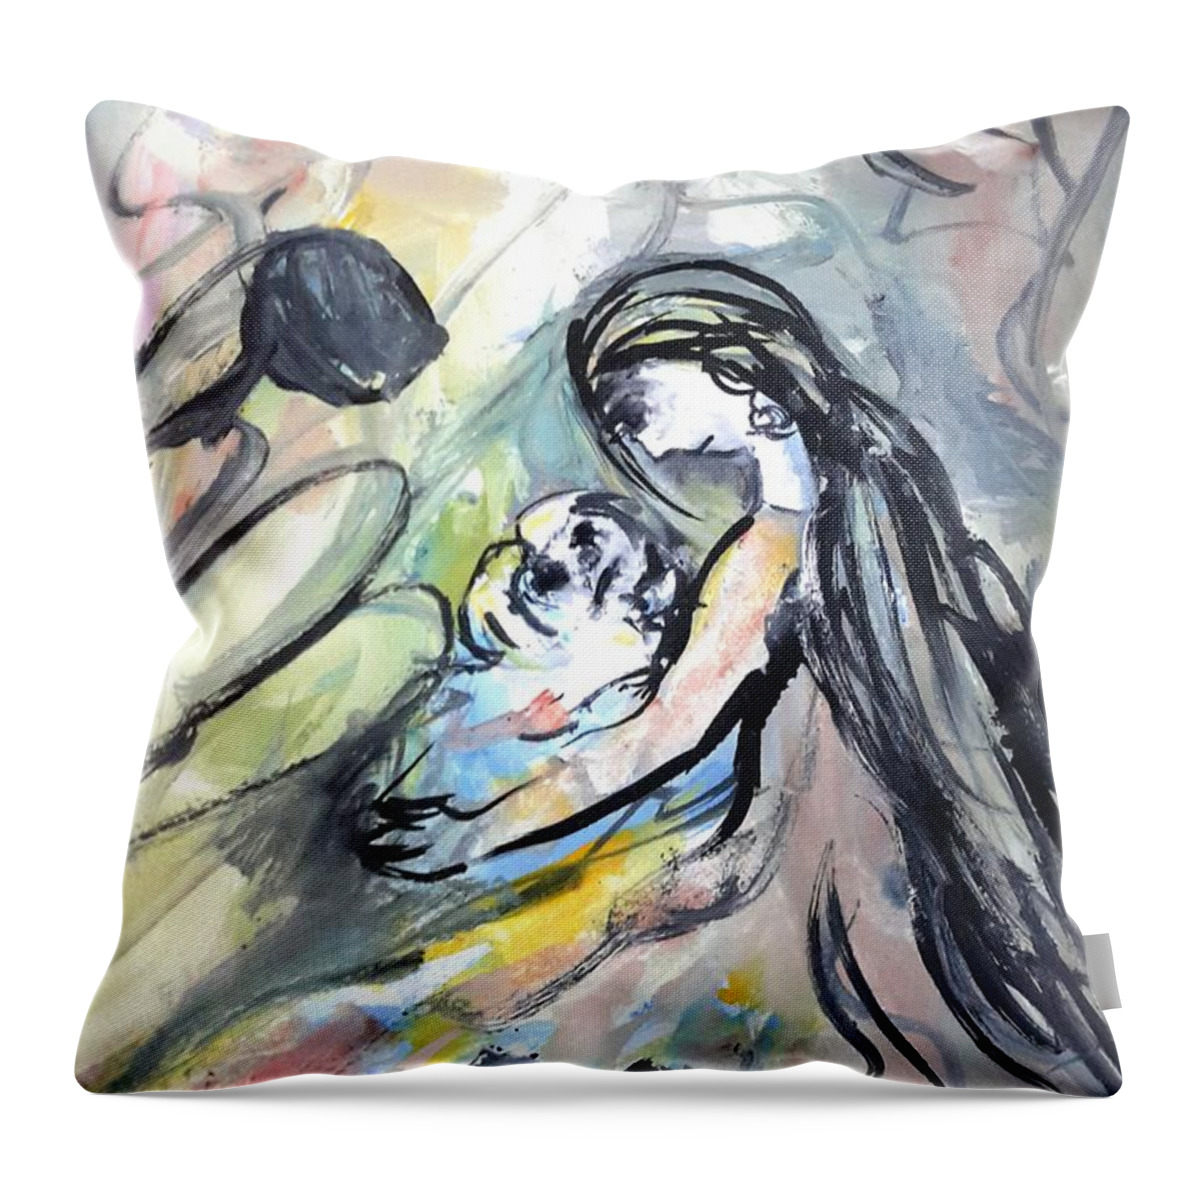  Throw Pillow featuring the painting Not leave your family by Wanvisa Klawklean